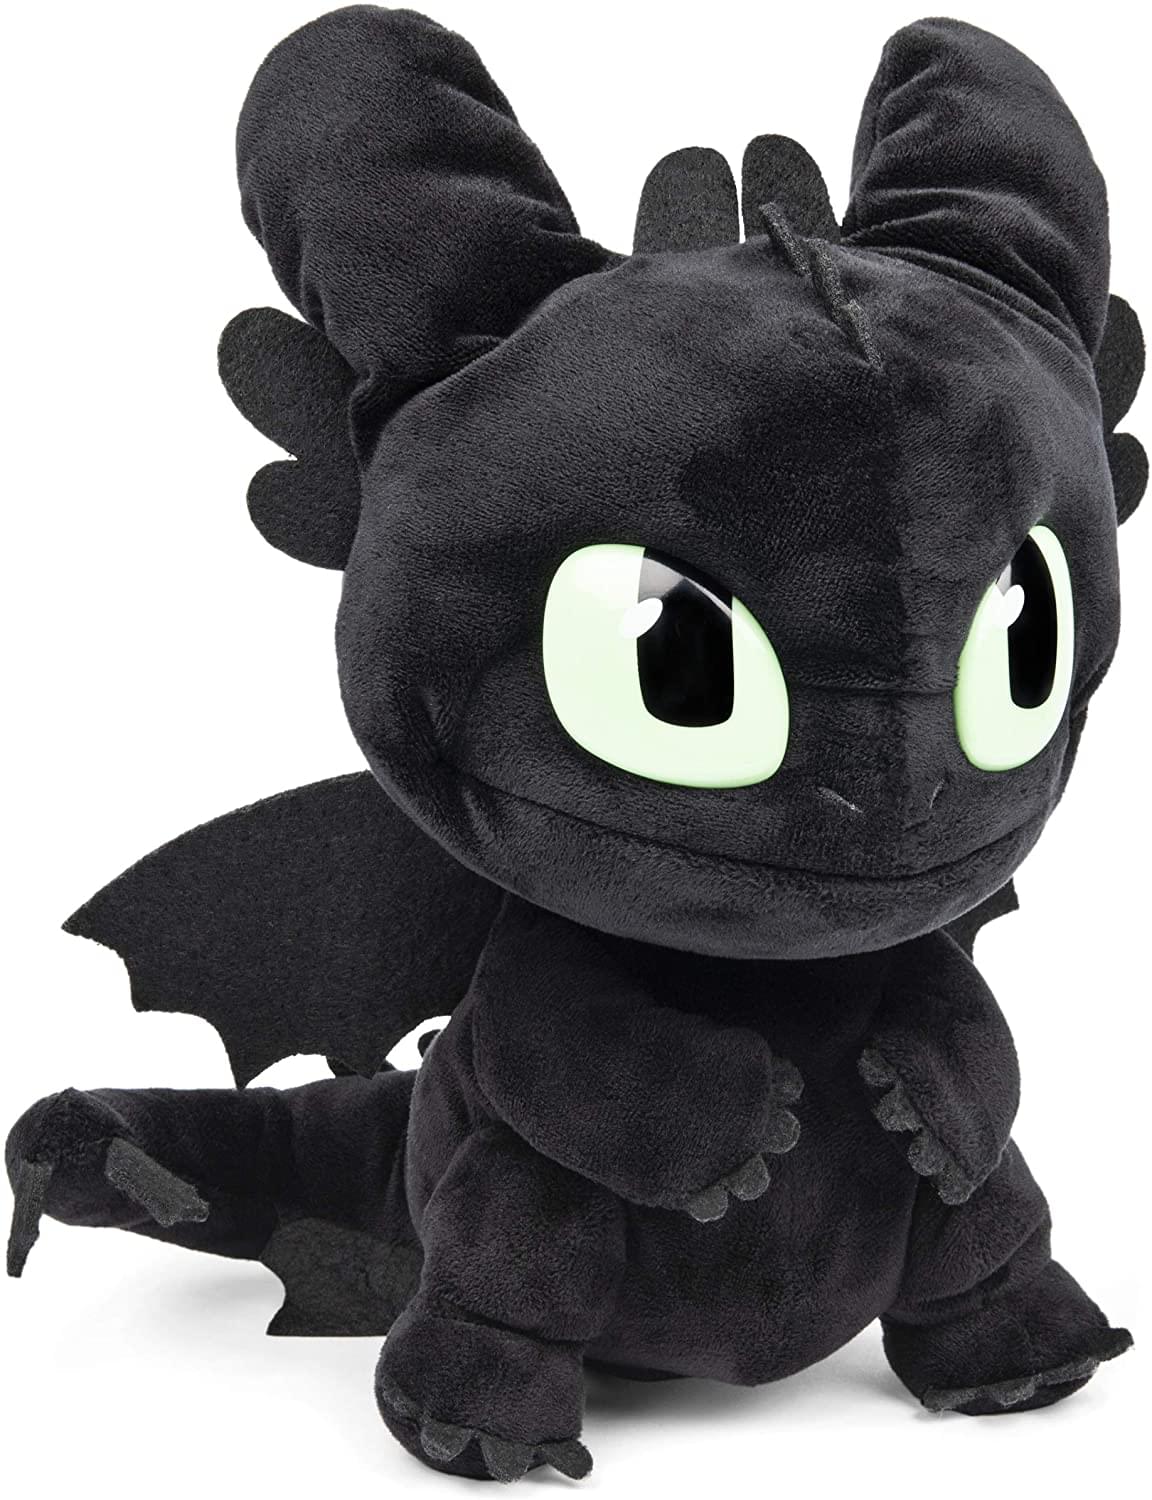 How To Train Your Dragon Squeeze & Roar Toothless , 11 Inch Plush With Sounds